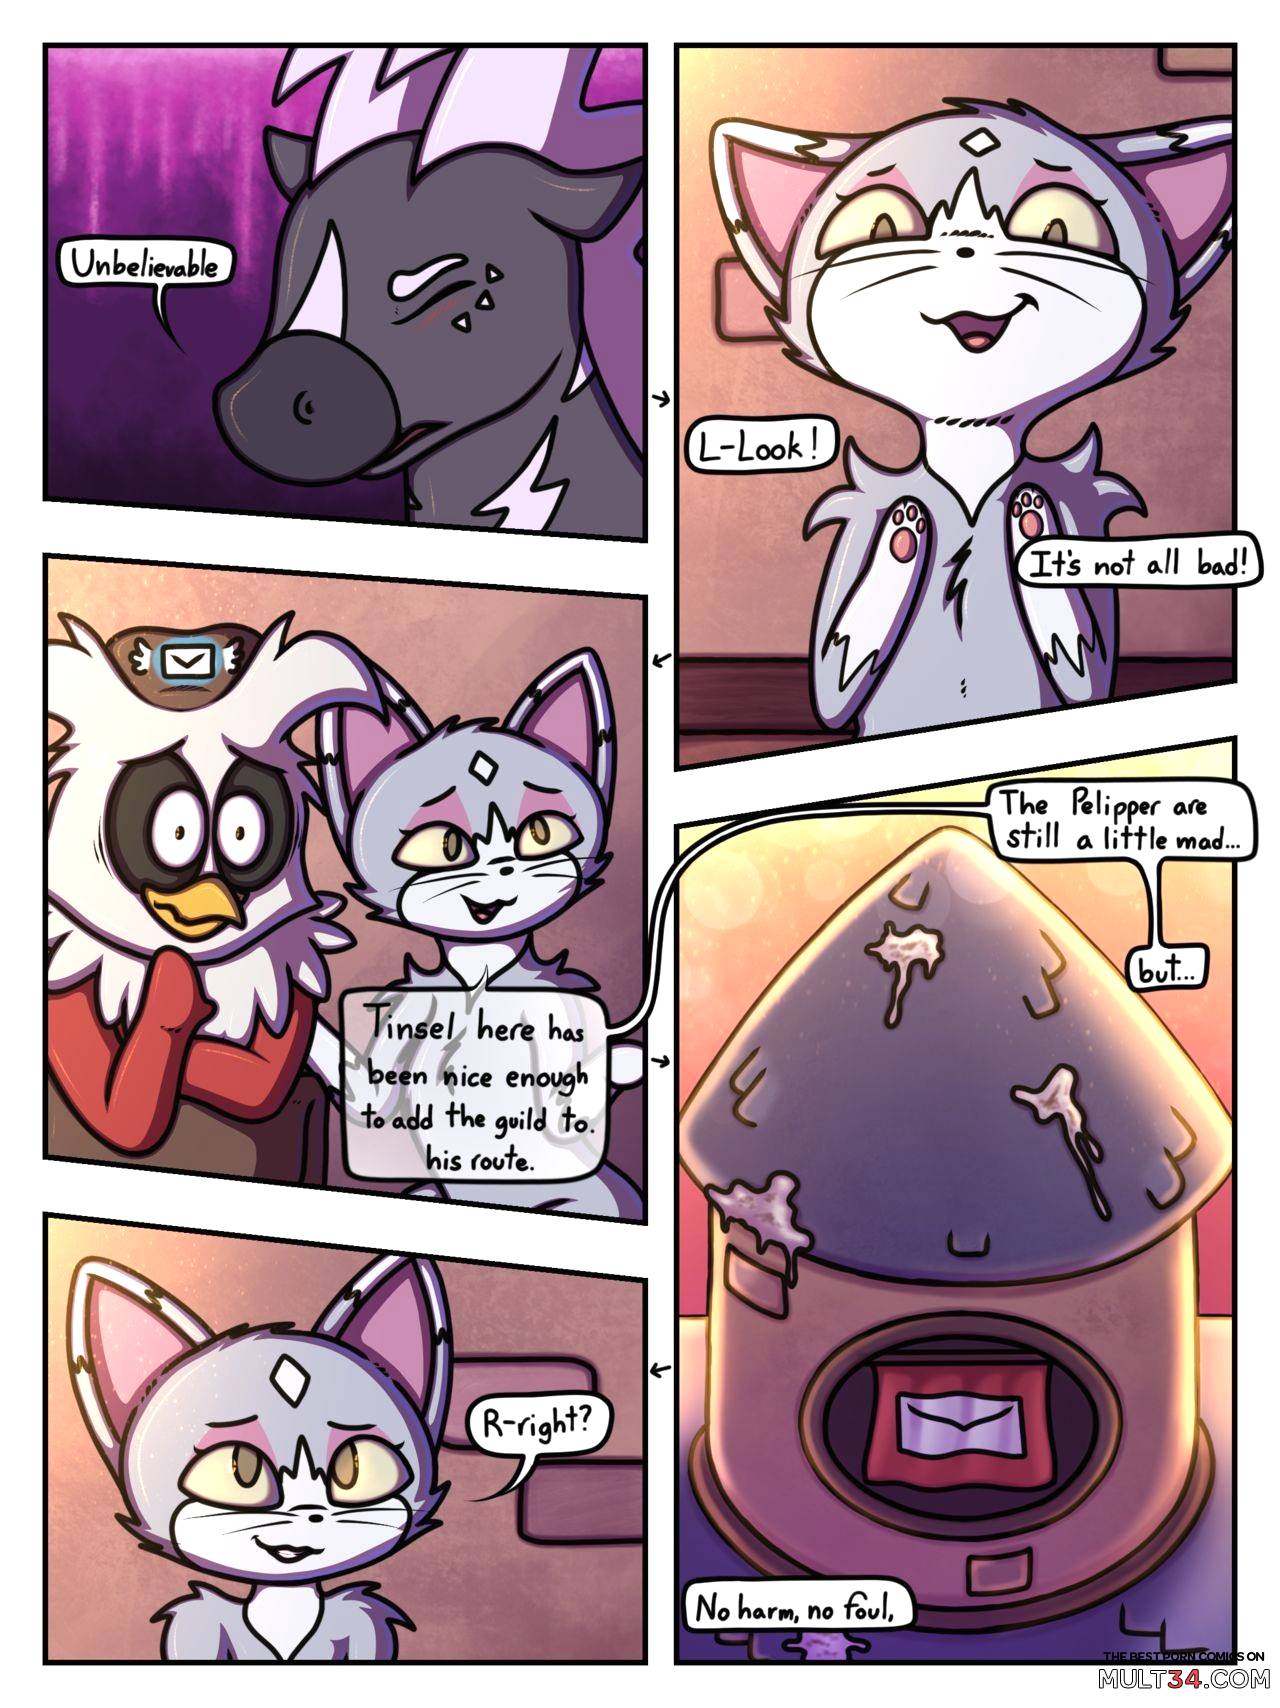 Wanderlust chapter 1 page 11